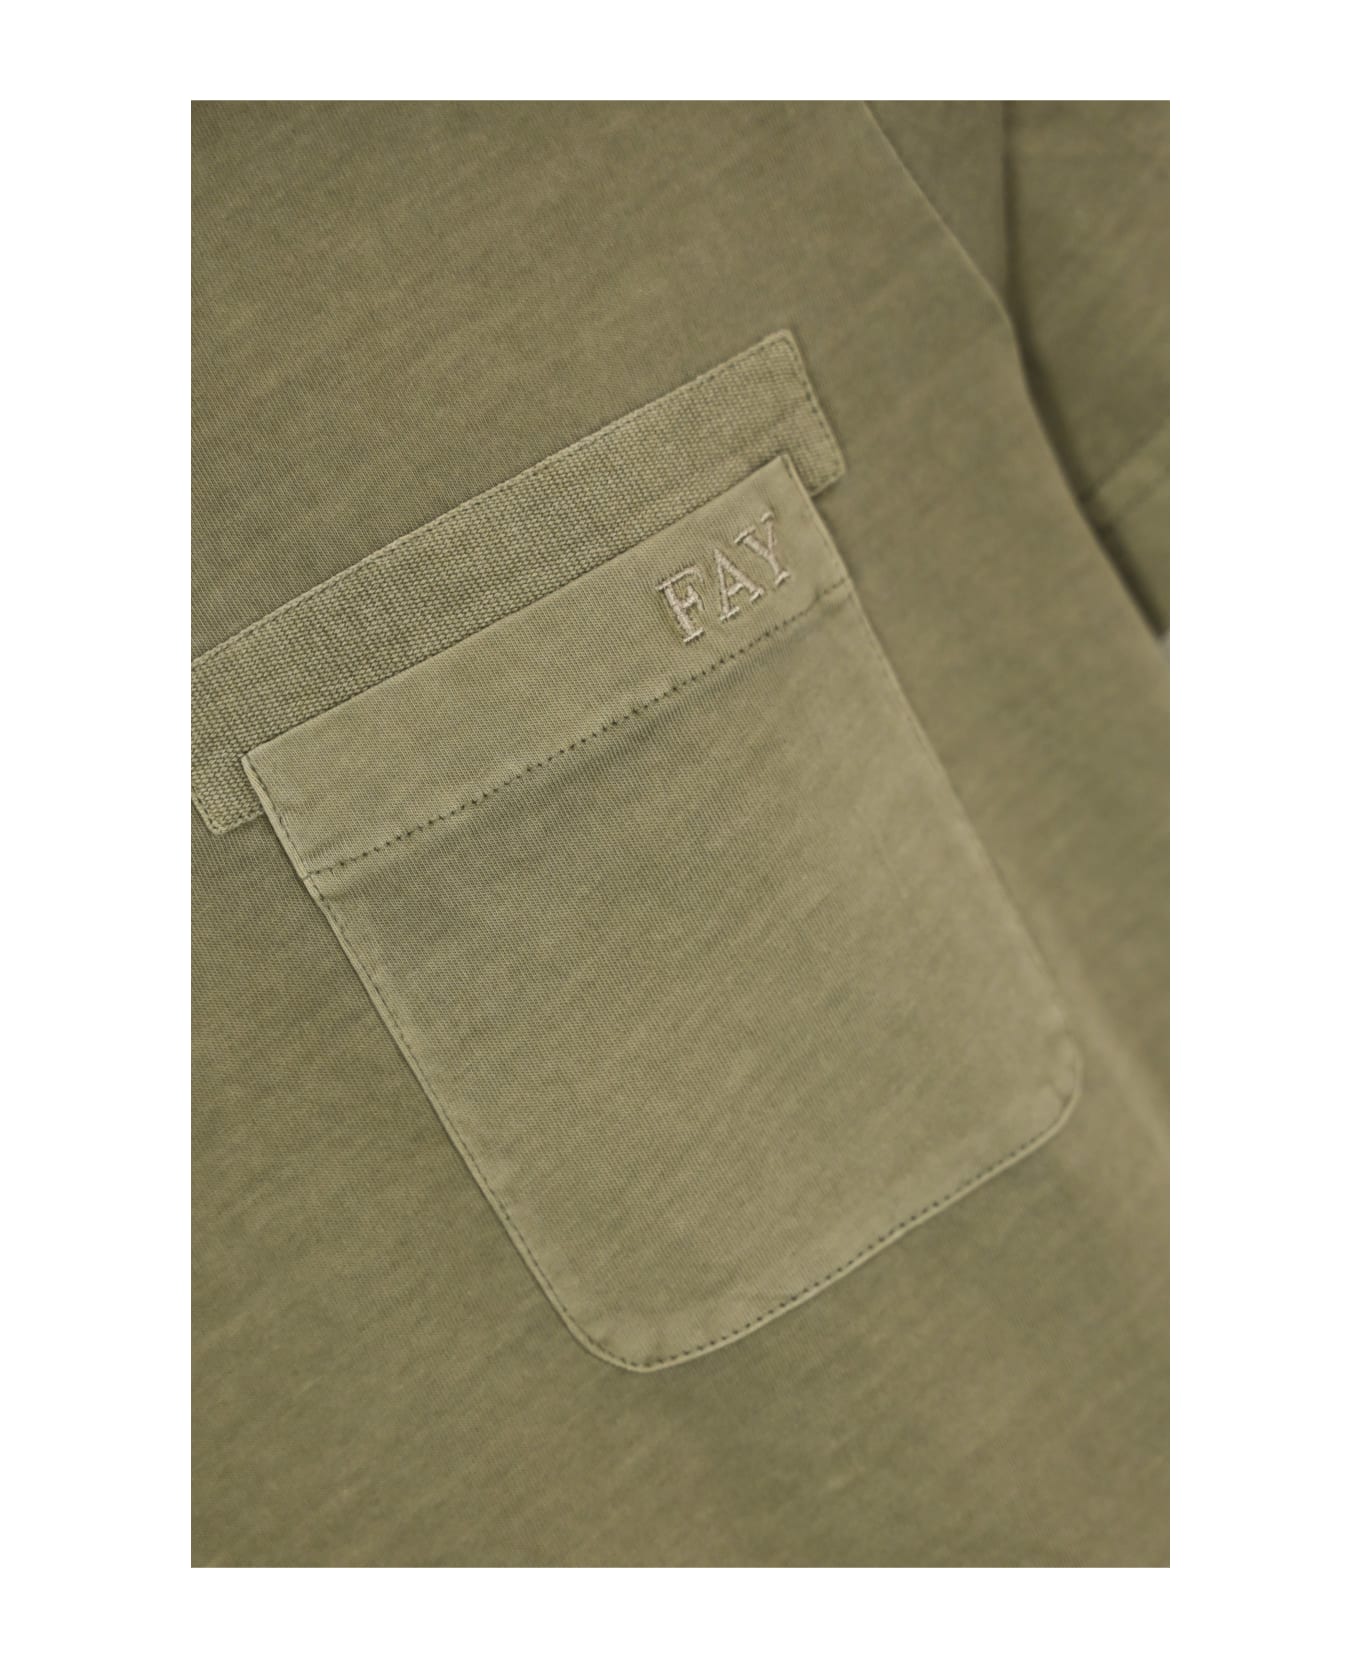 Fay T-shirt With Pocket - Verde